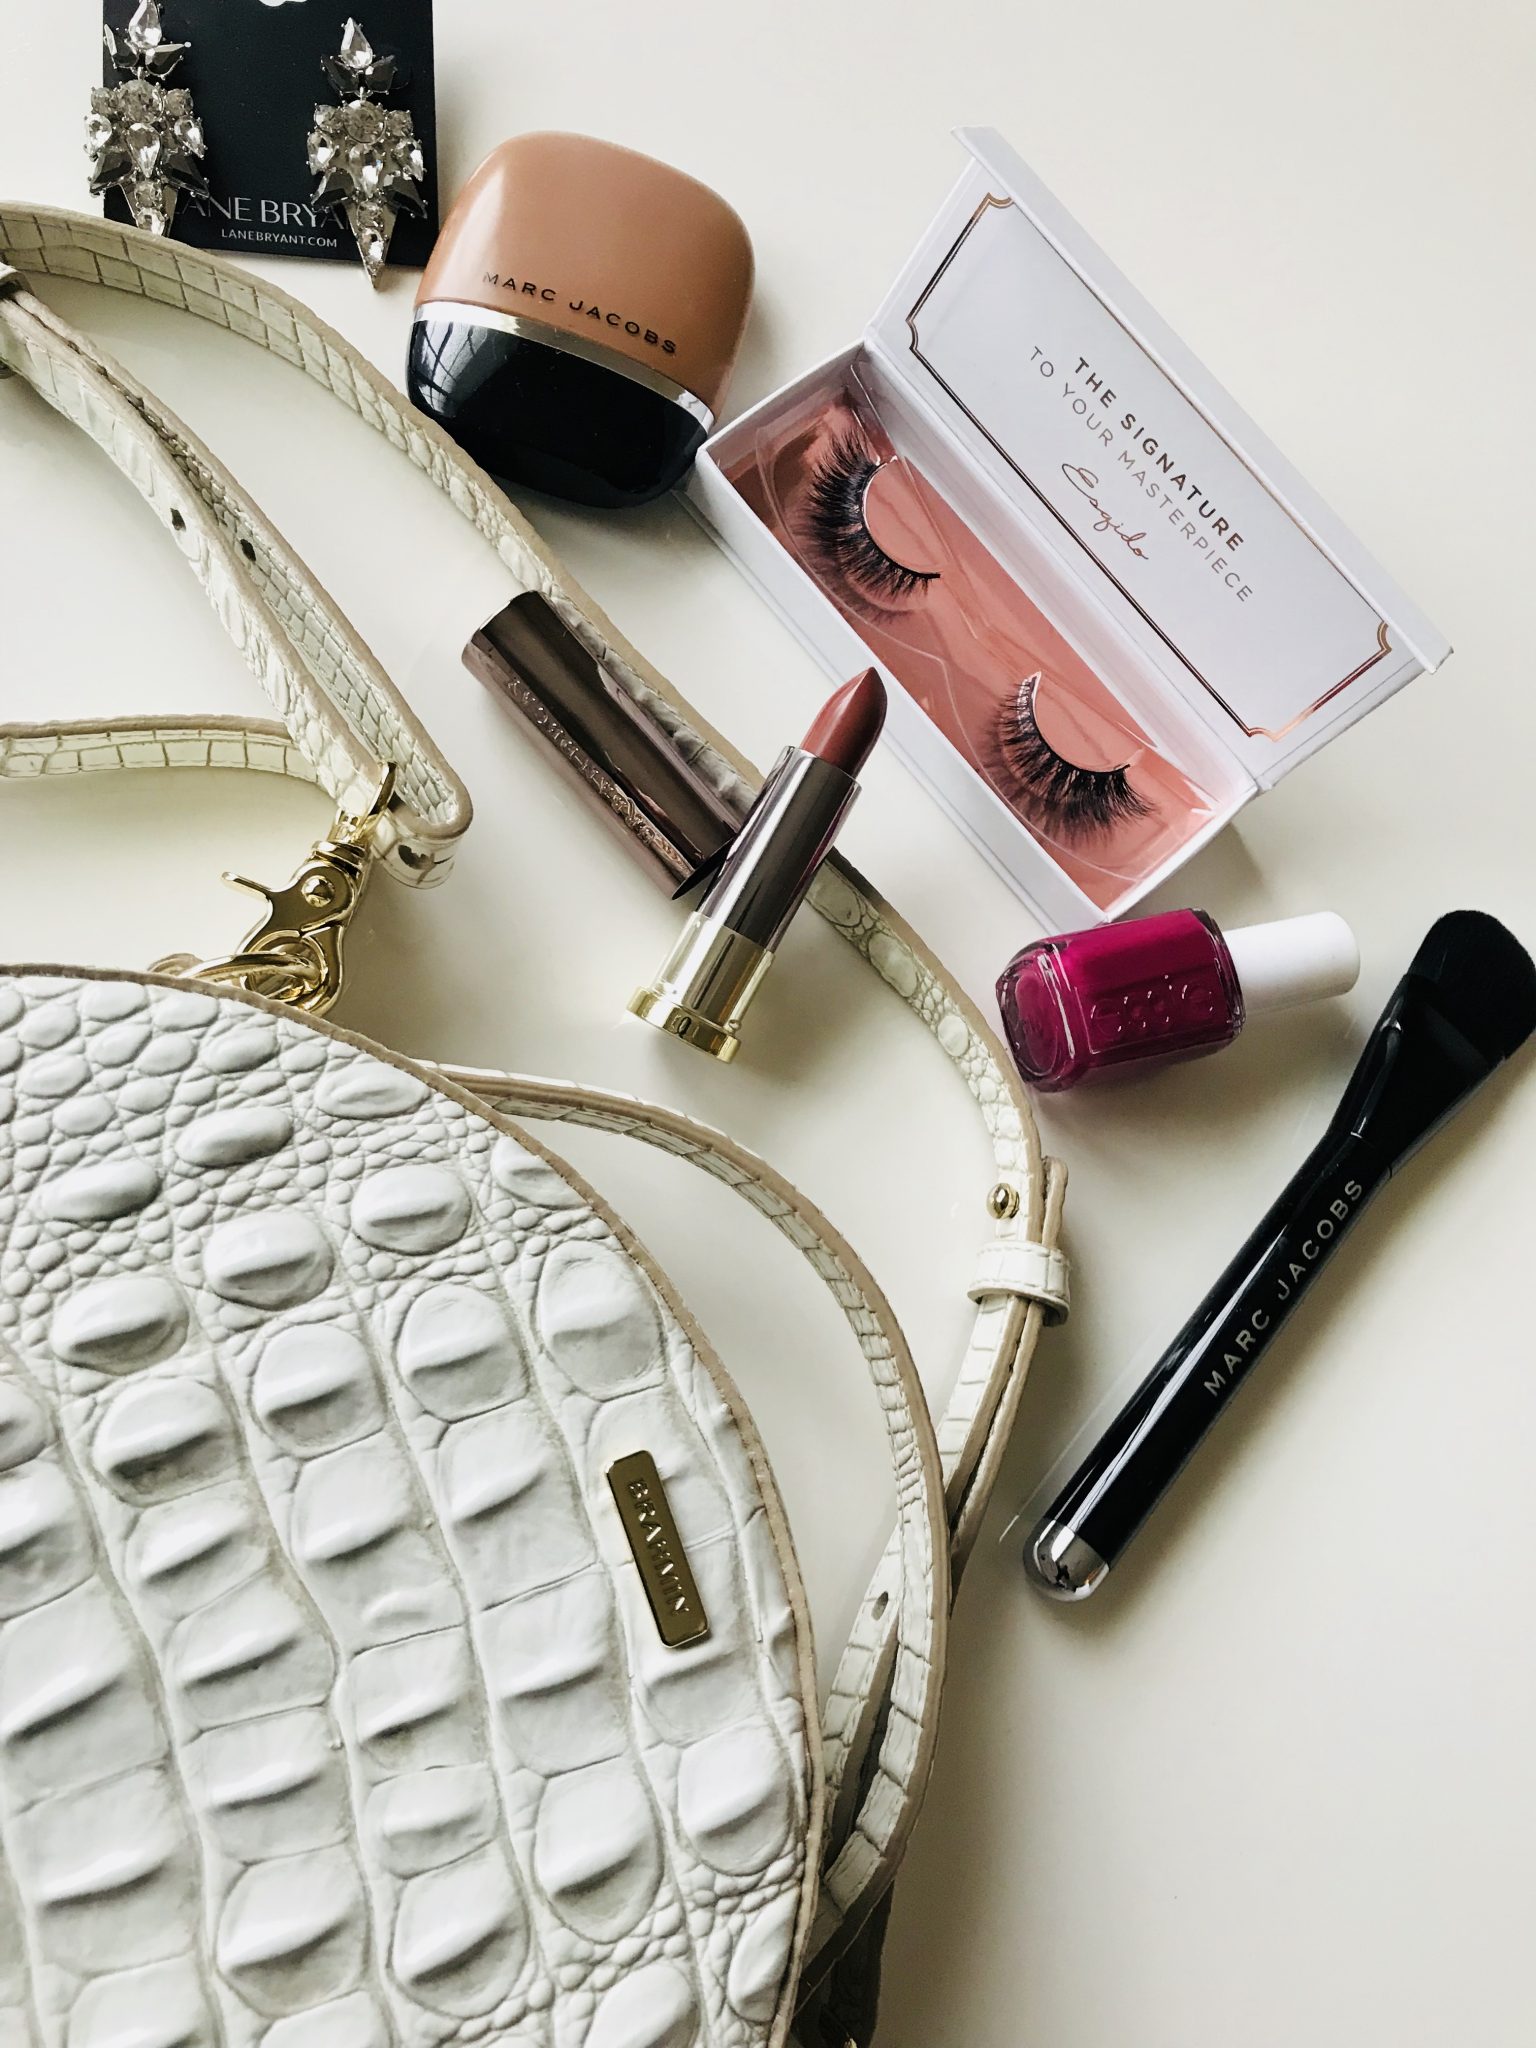 What's In My Bag: Brahmin Lane Coconut Melbourne - Talking With Tami